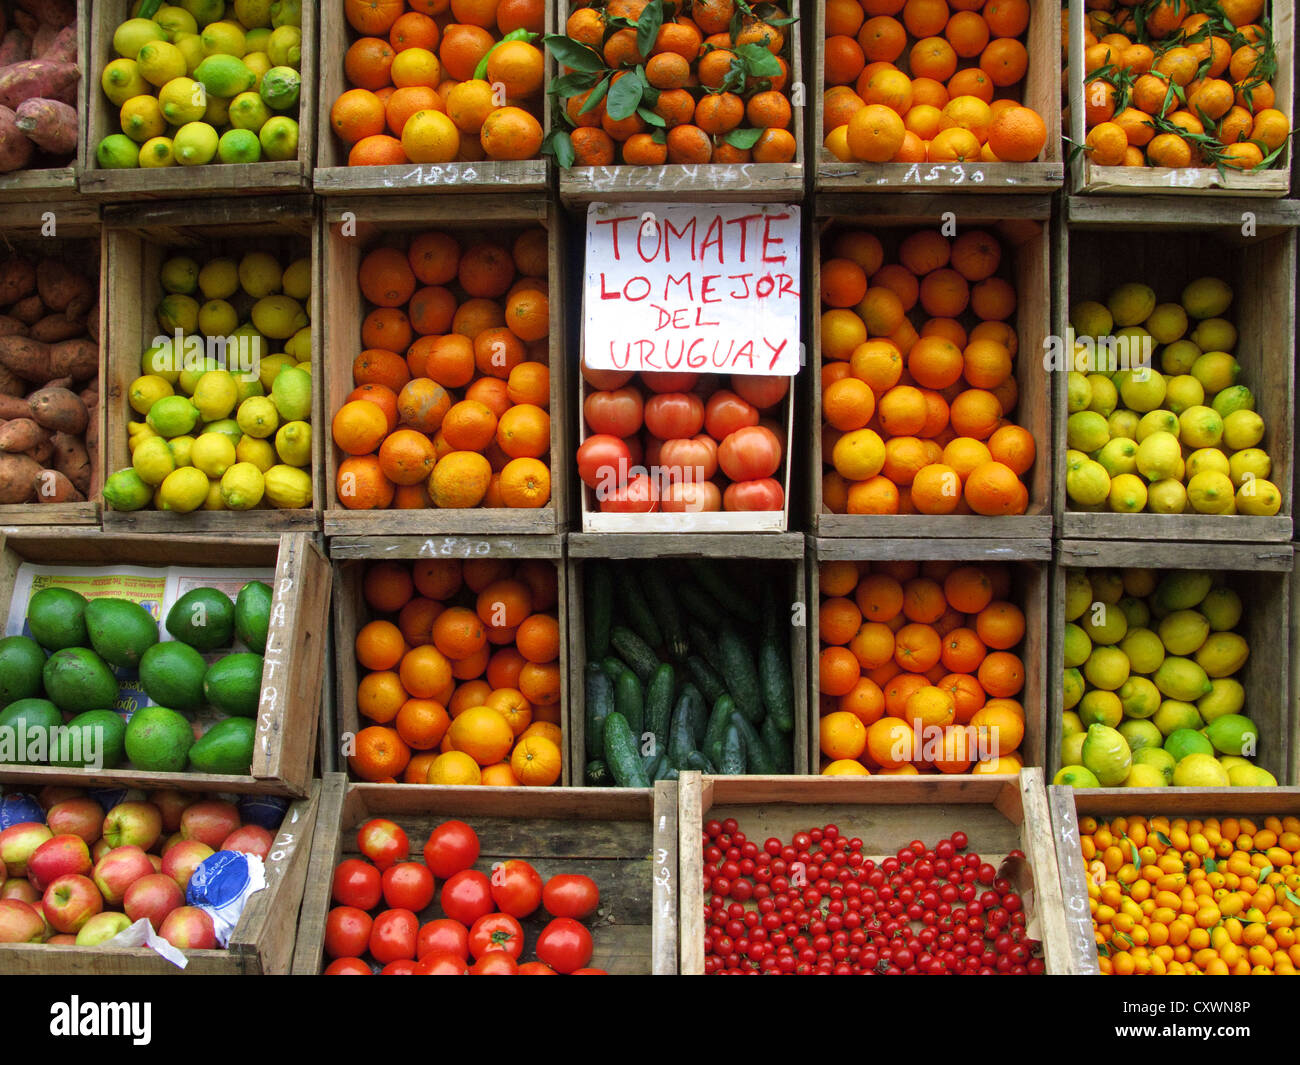 A Greengrocers Fruits and Vegetables display , Montevideo Ciudad Vieja district, Uruguay, South America Stock Photo